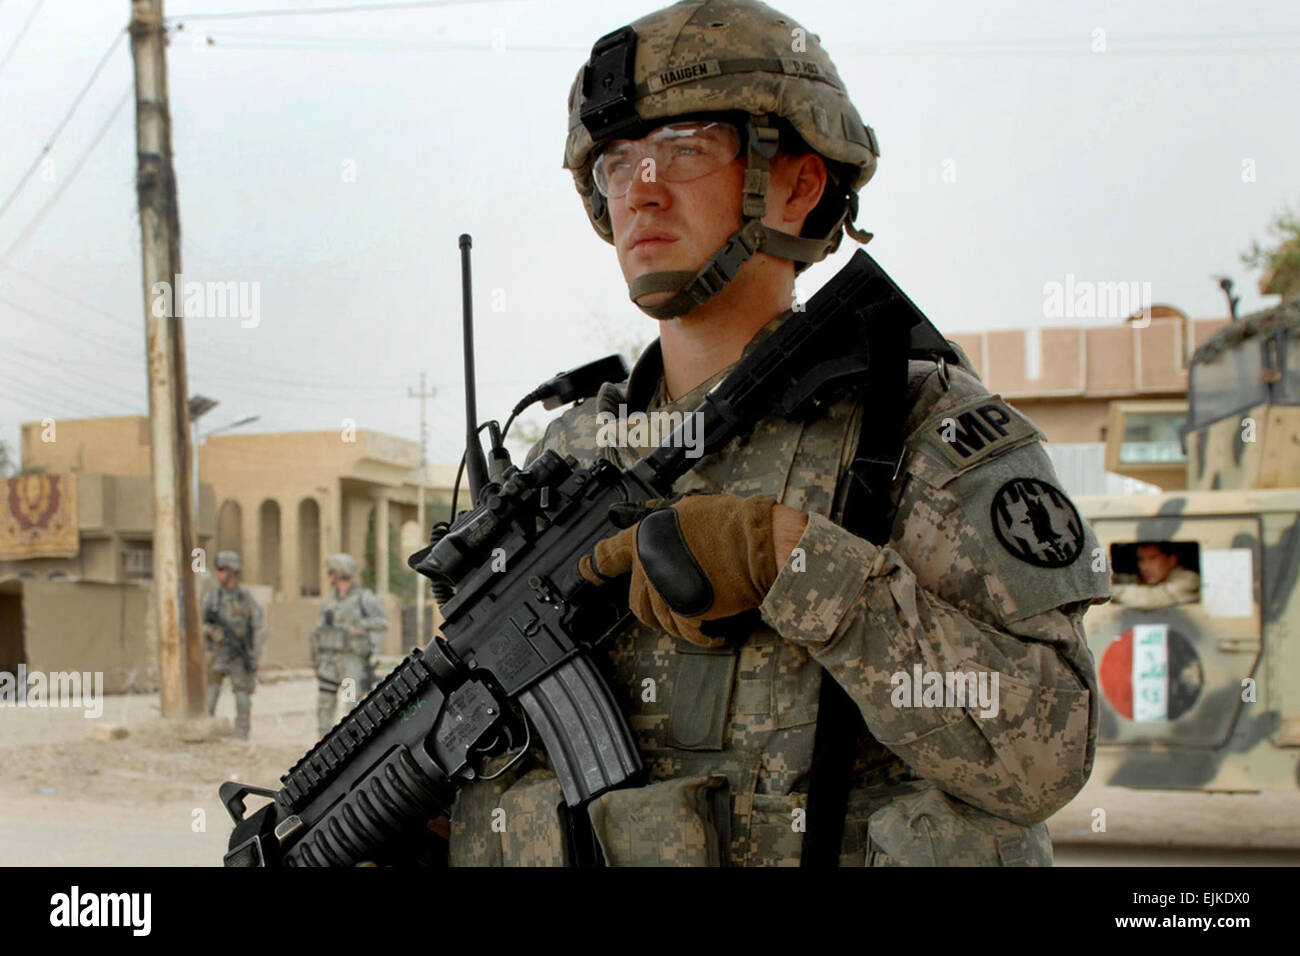 U.S. Army Sgt. Justin Haugen provides security for a new market in Abu Ghraib, Iraq, April 29, 2009. Haugen is assigned to 8th Military Police Brigade.  Staff Sgt. Mark Burrell Stock Photo